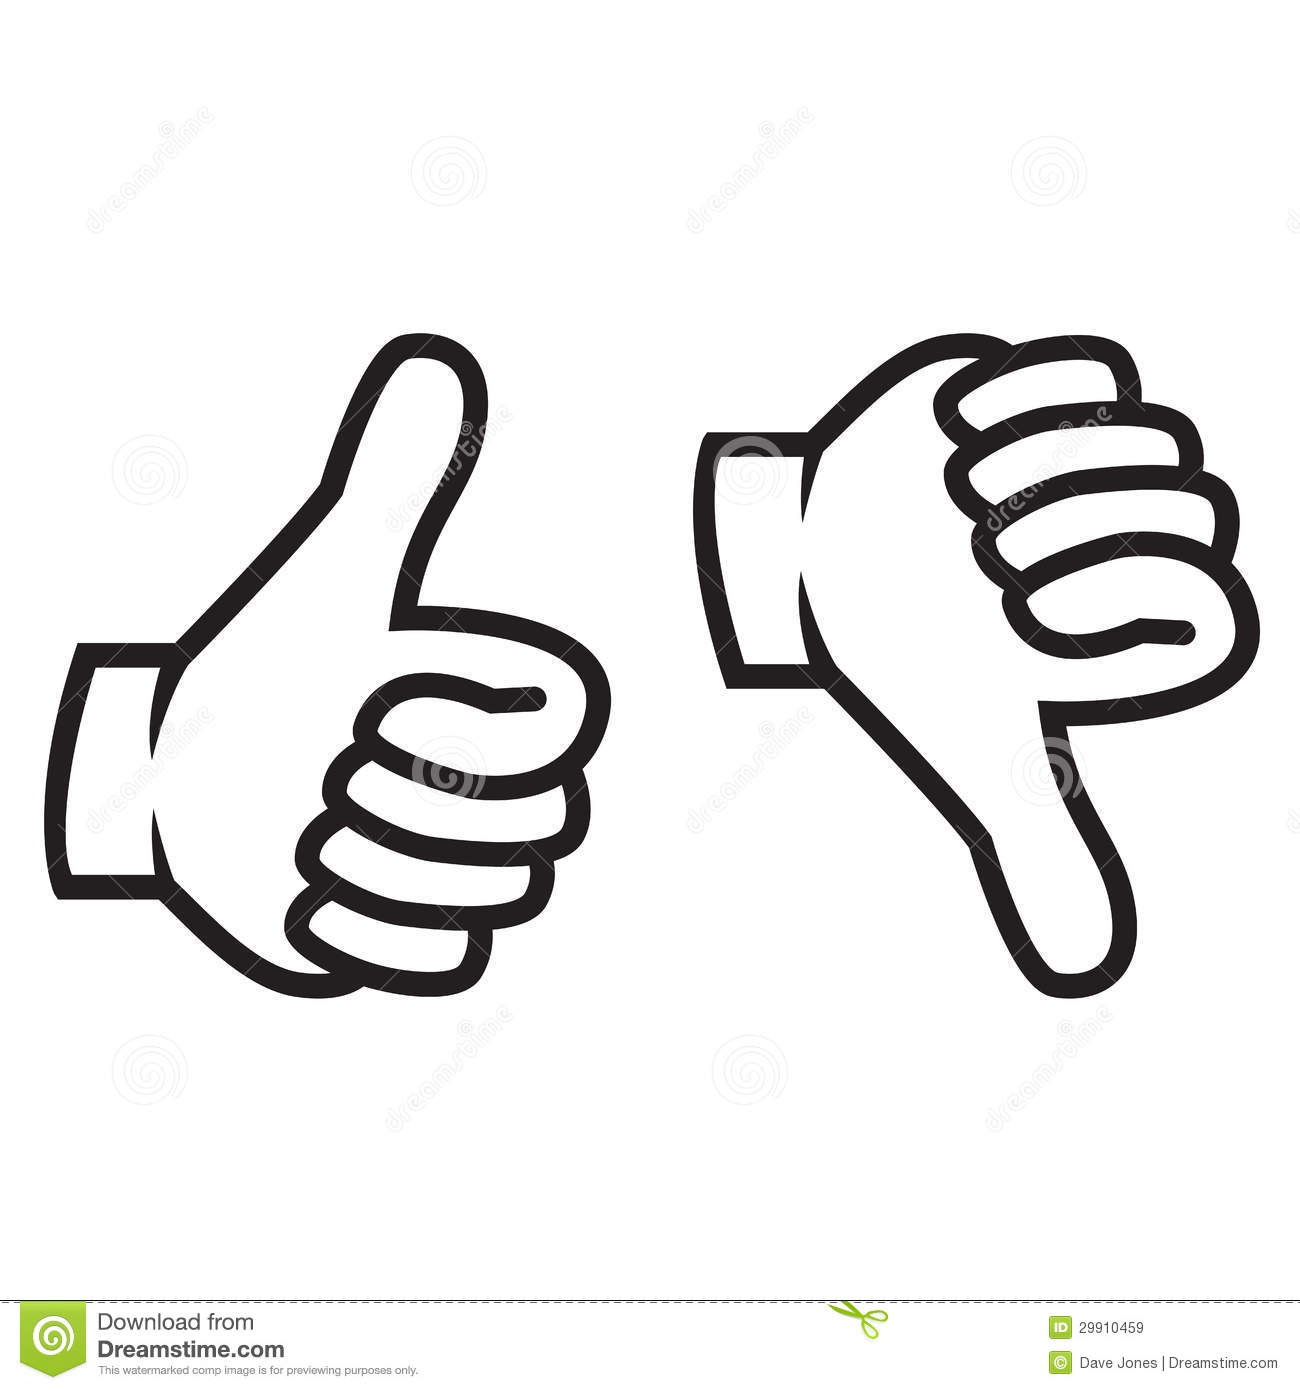 Thumbs Up And Down Gesture Clip Art Silhouette In Black  This Image Is